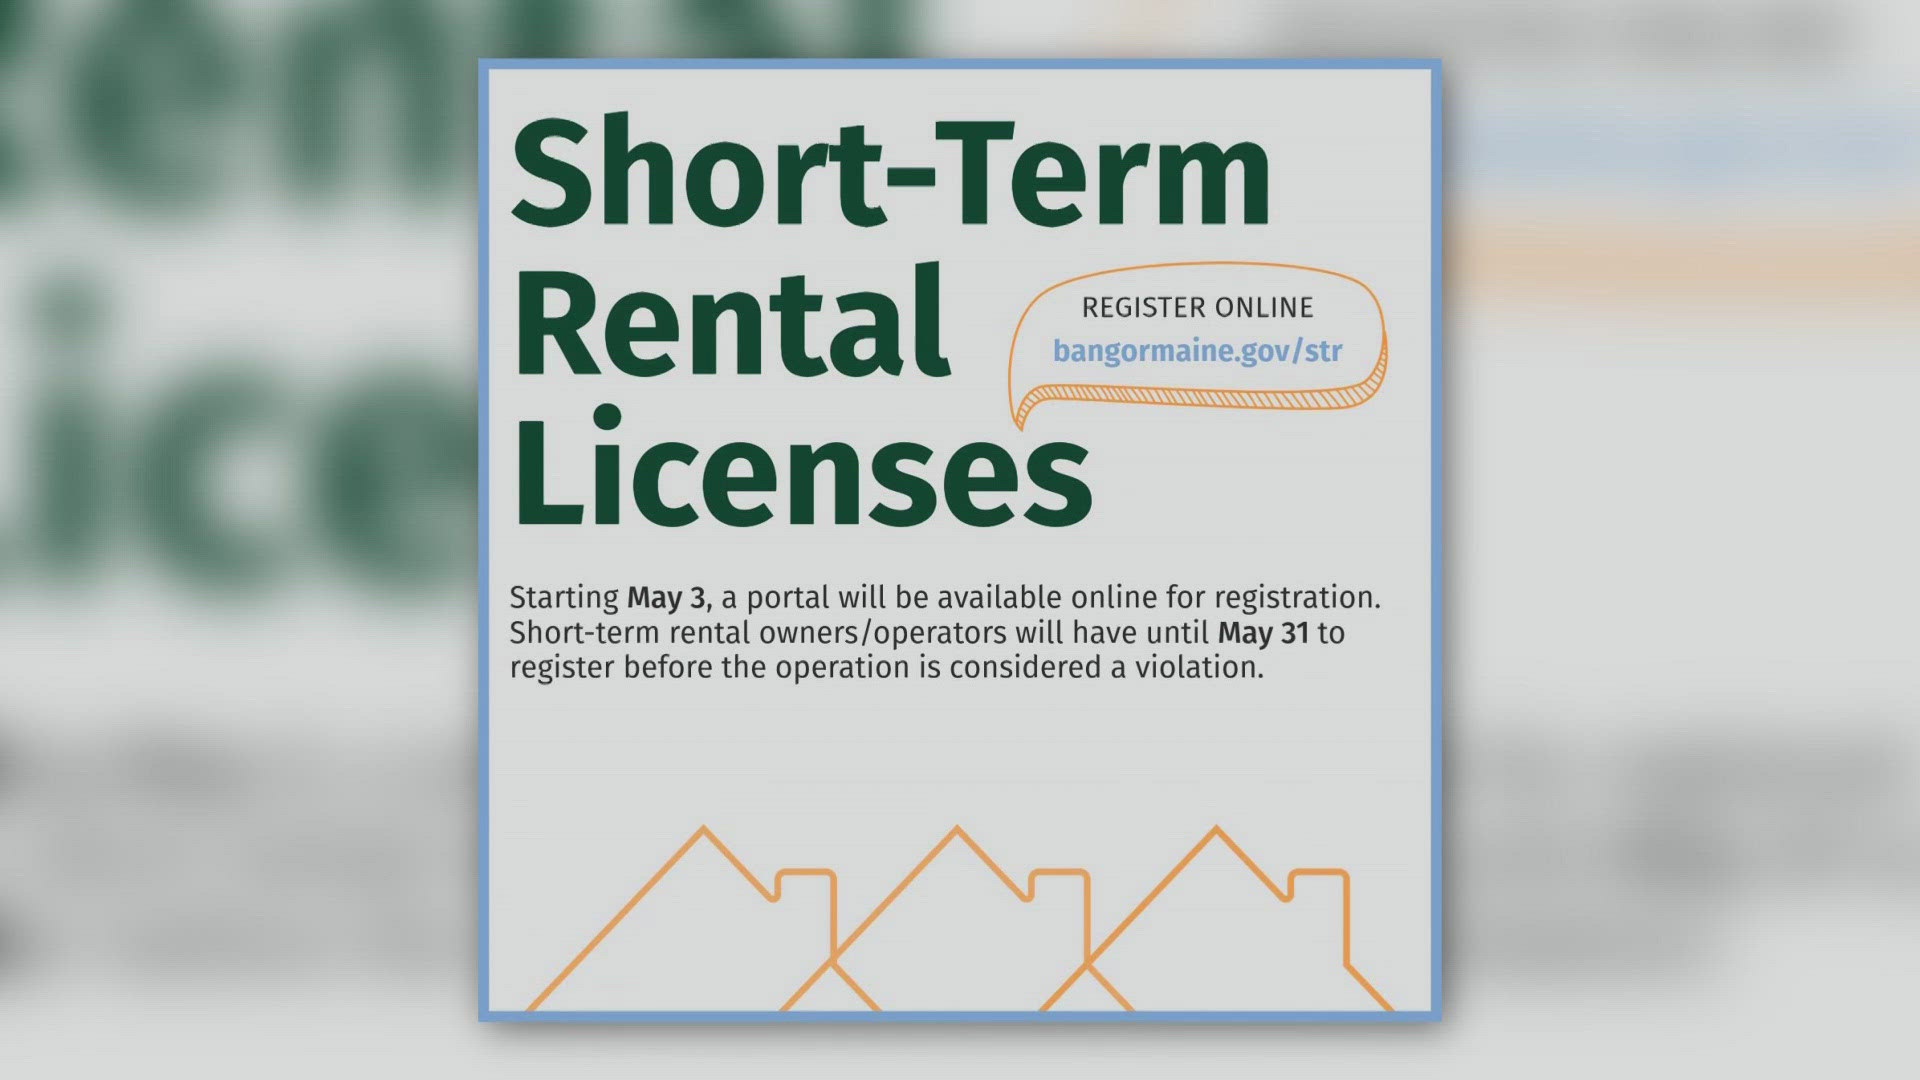 The portal allows property owners to apply for and renew licenses for short-term rental properties, like Airbnbs.